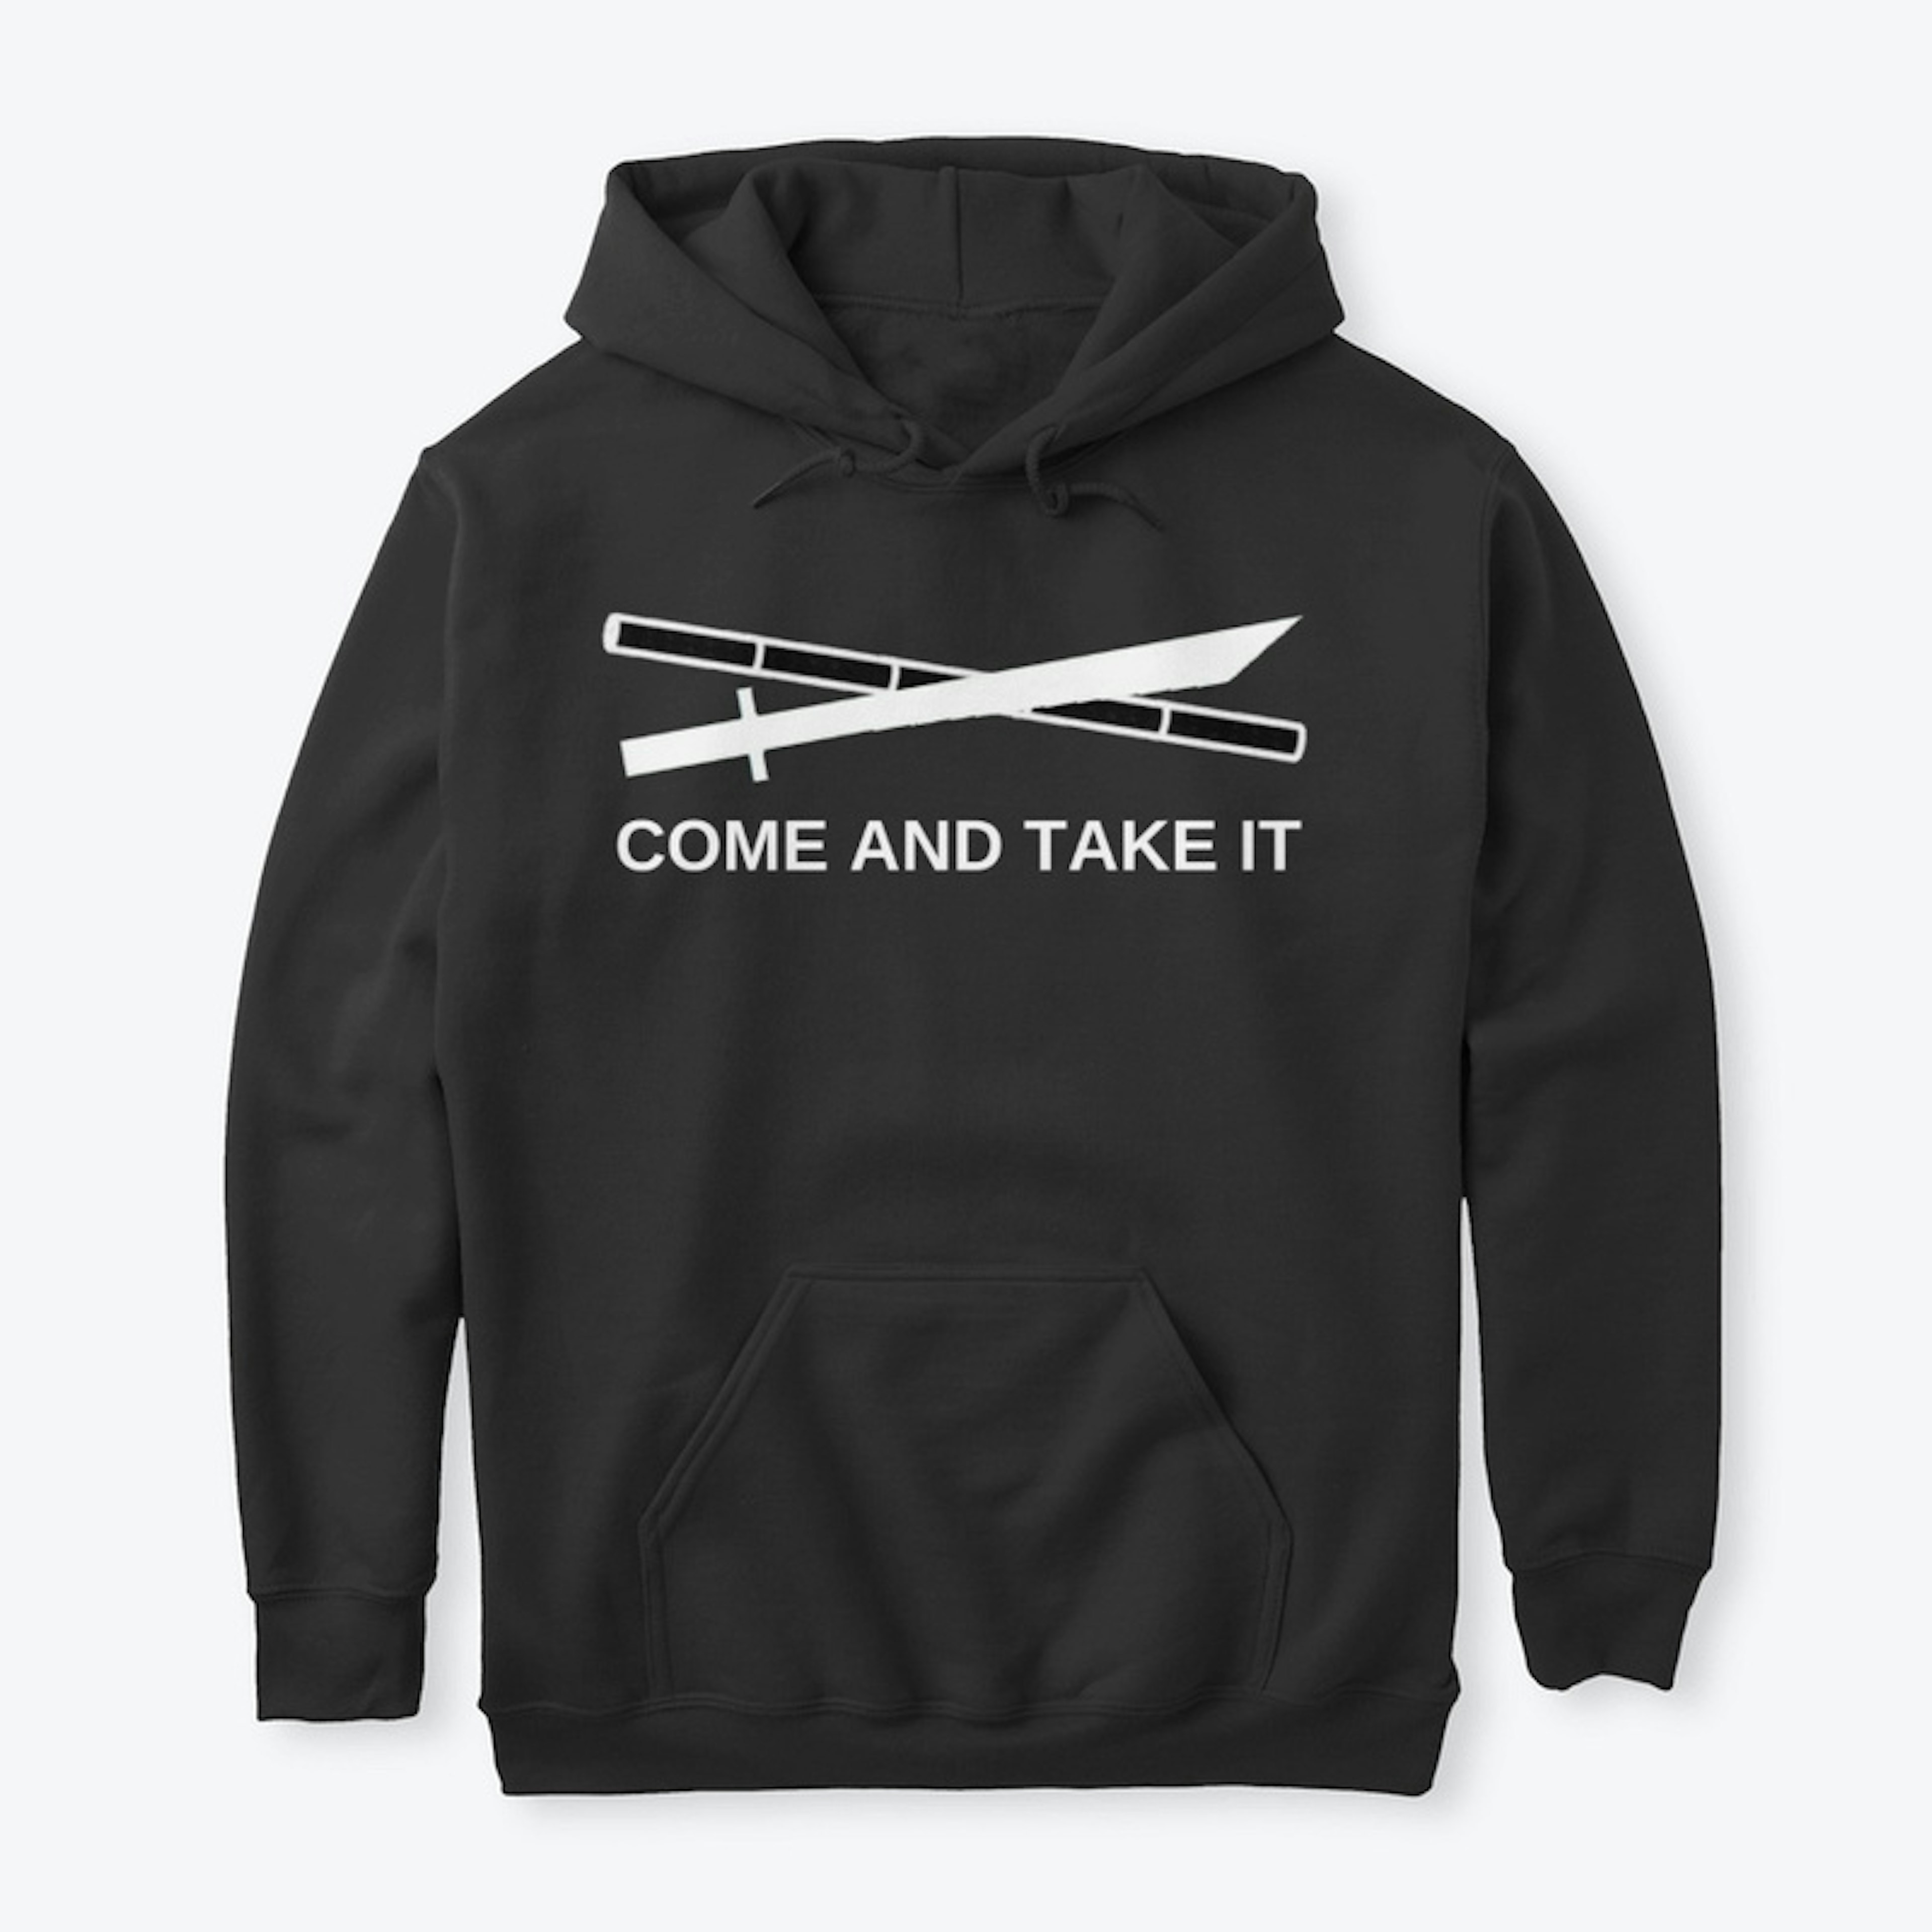 Come And Take It! Reversed